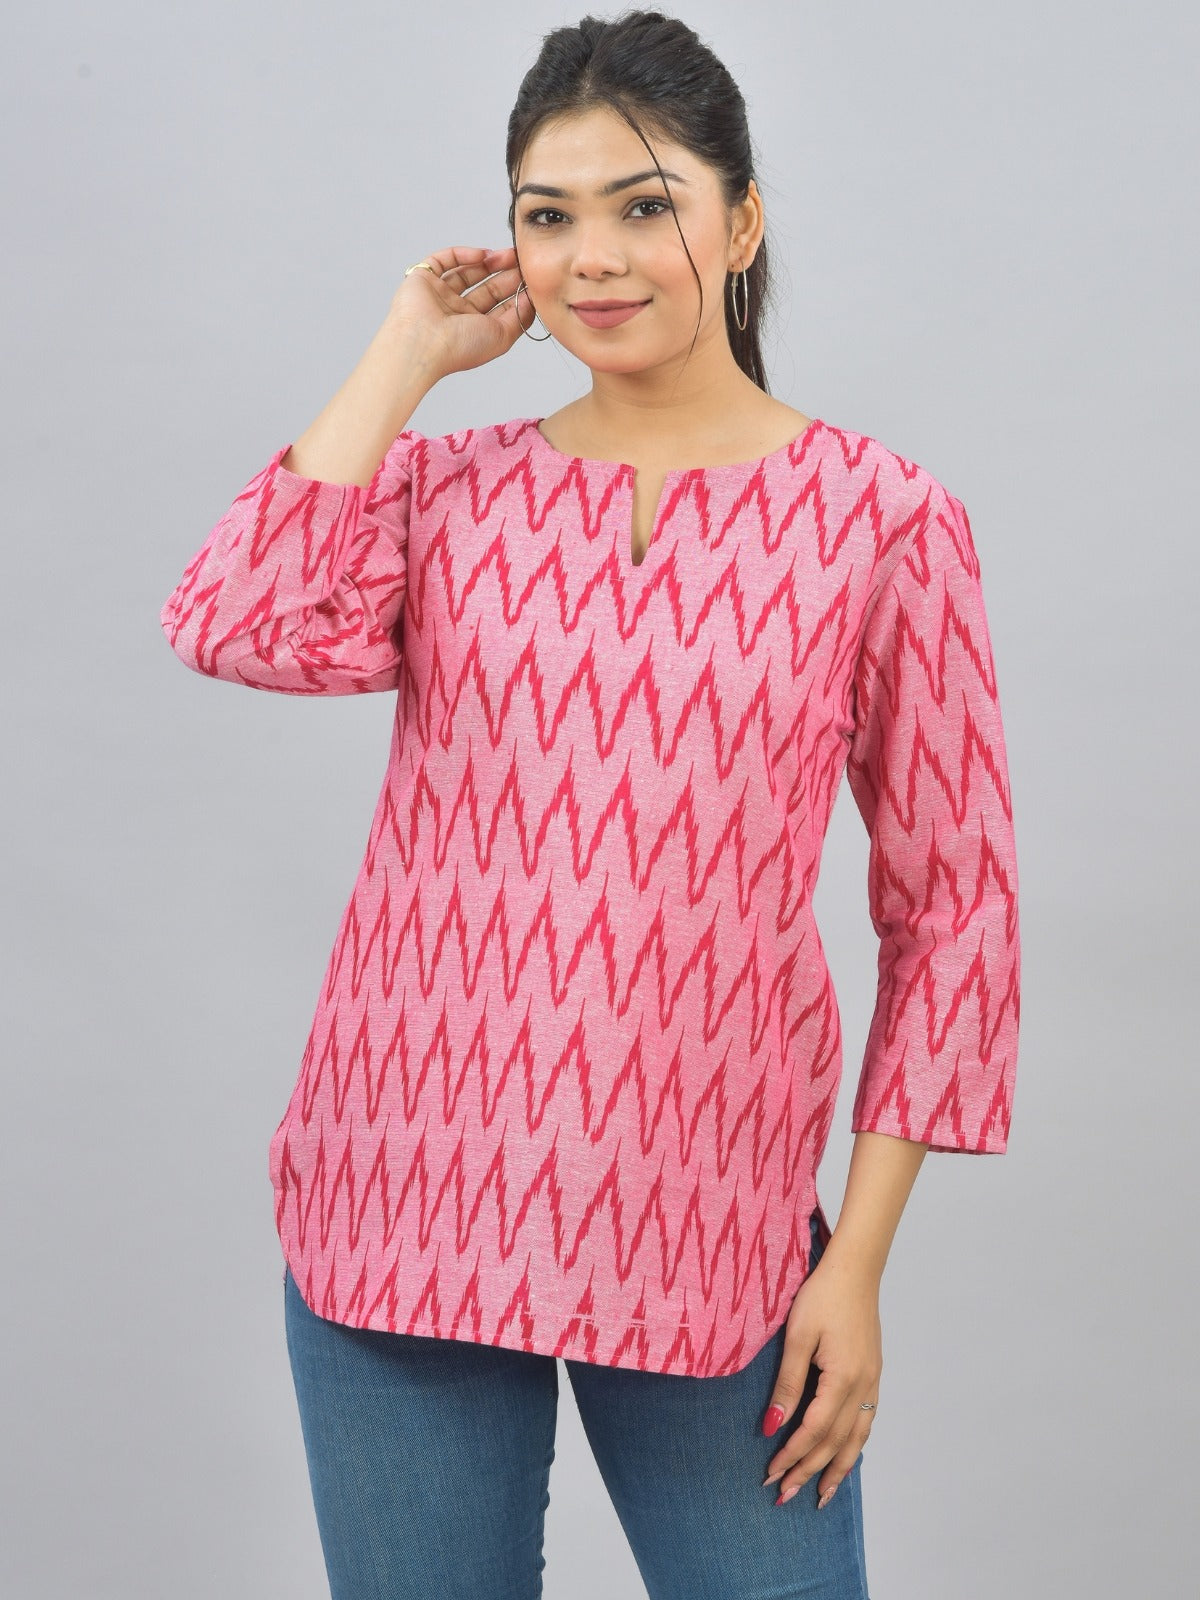 Pack Of 2 Womens Regular Fit Blue Tribal And Pink Zig Zag Printed Tops Combo